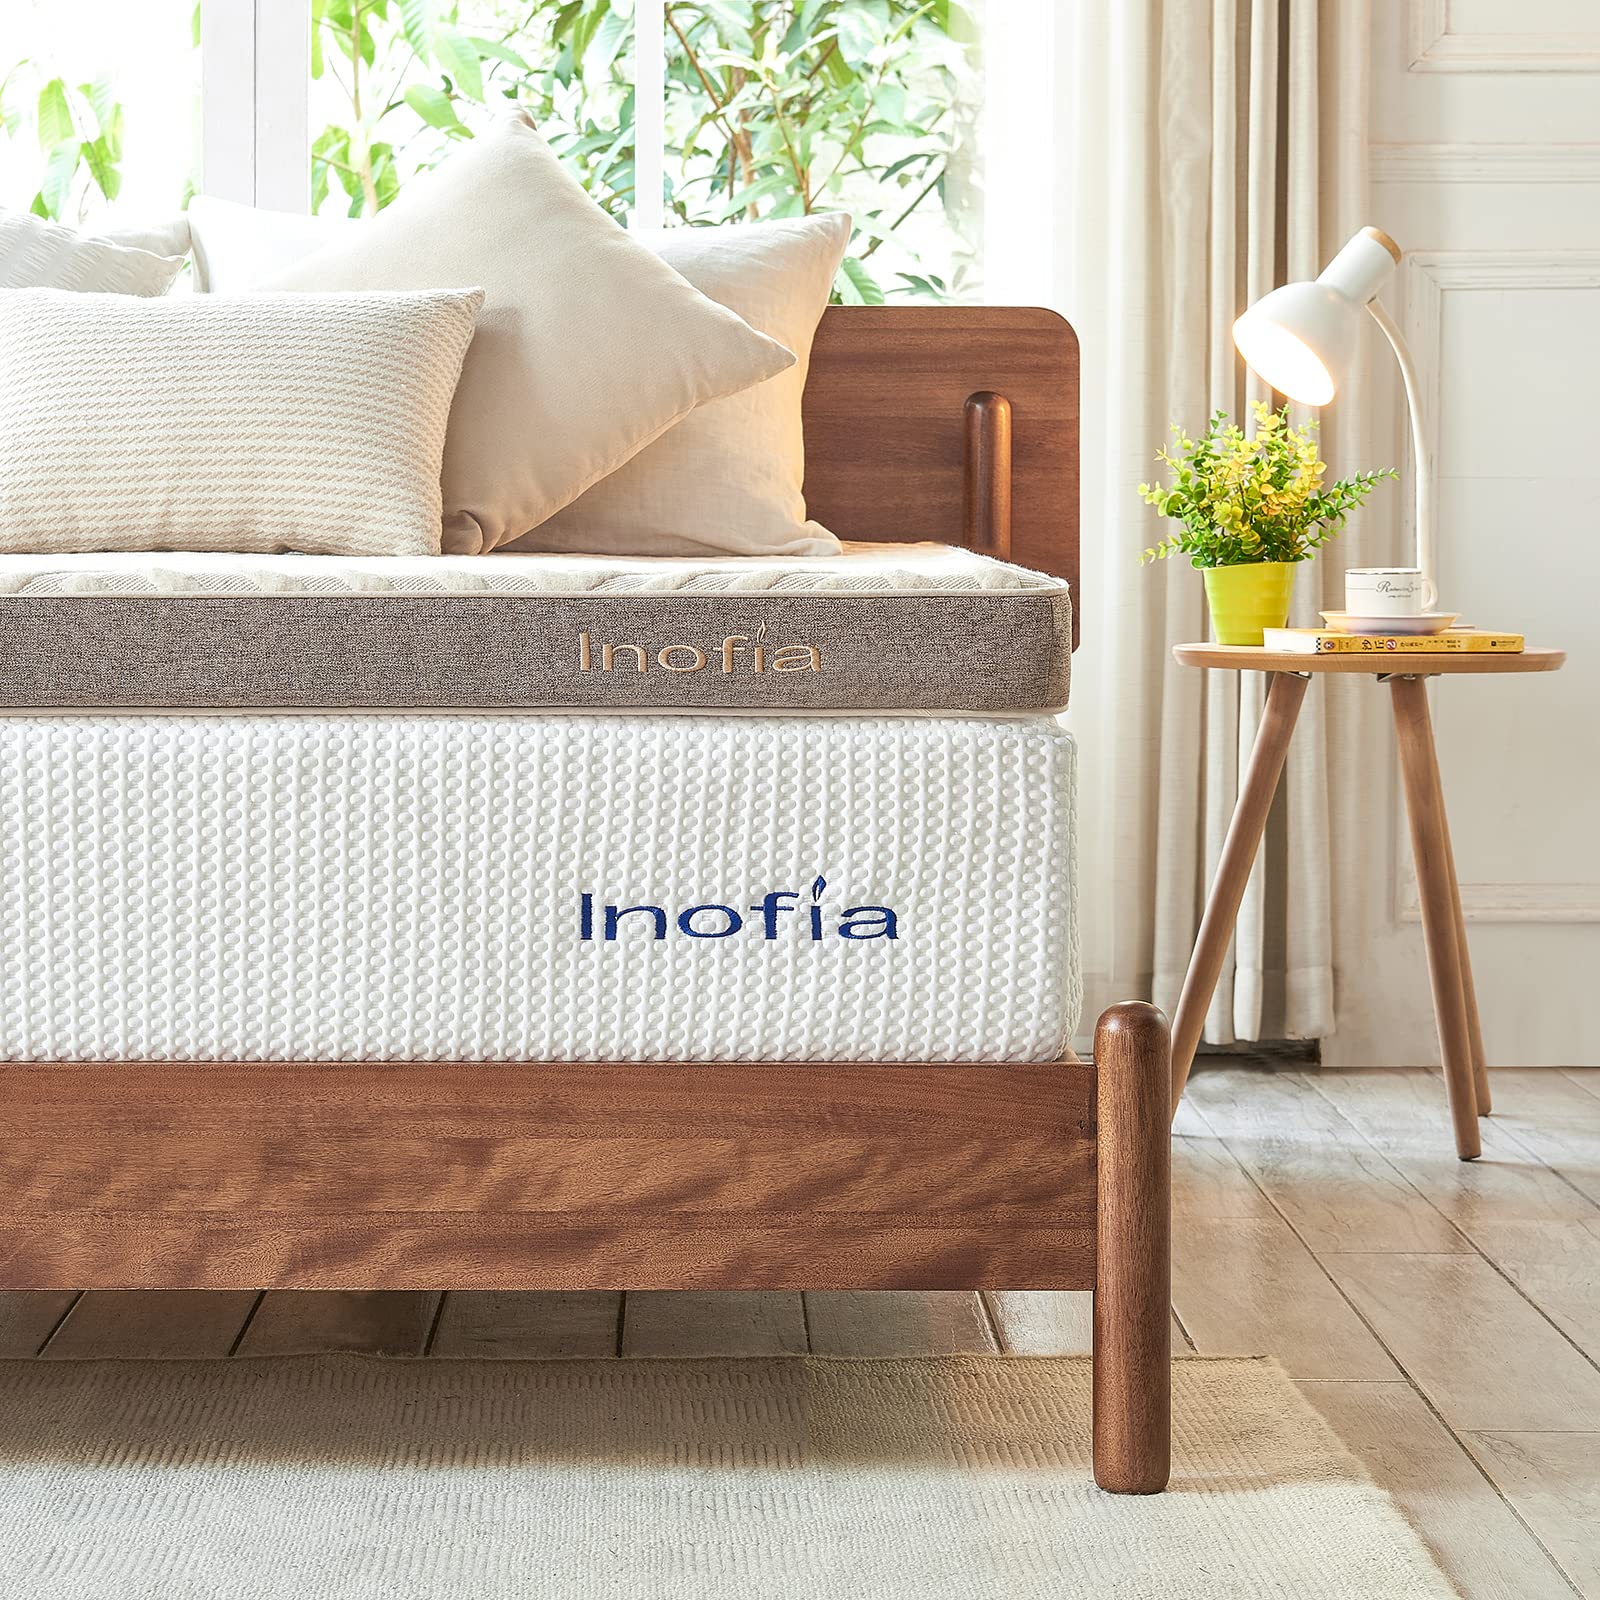 Inofia Mattress Topper Double, 3" Gel Memory Foam Mattress Topper with Washable Linen Cover, GELEX Bed Topper - Dual Layer Foam for Cooling Comfort & Pressure Relief, 100-Night Trial (135x190cm)